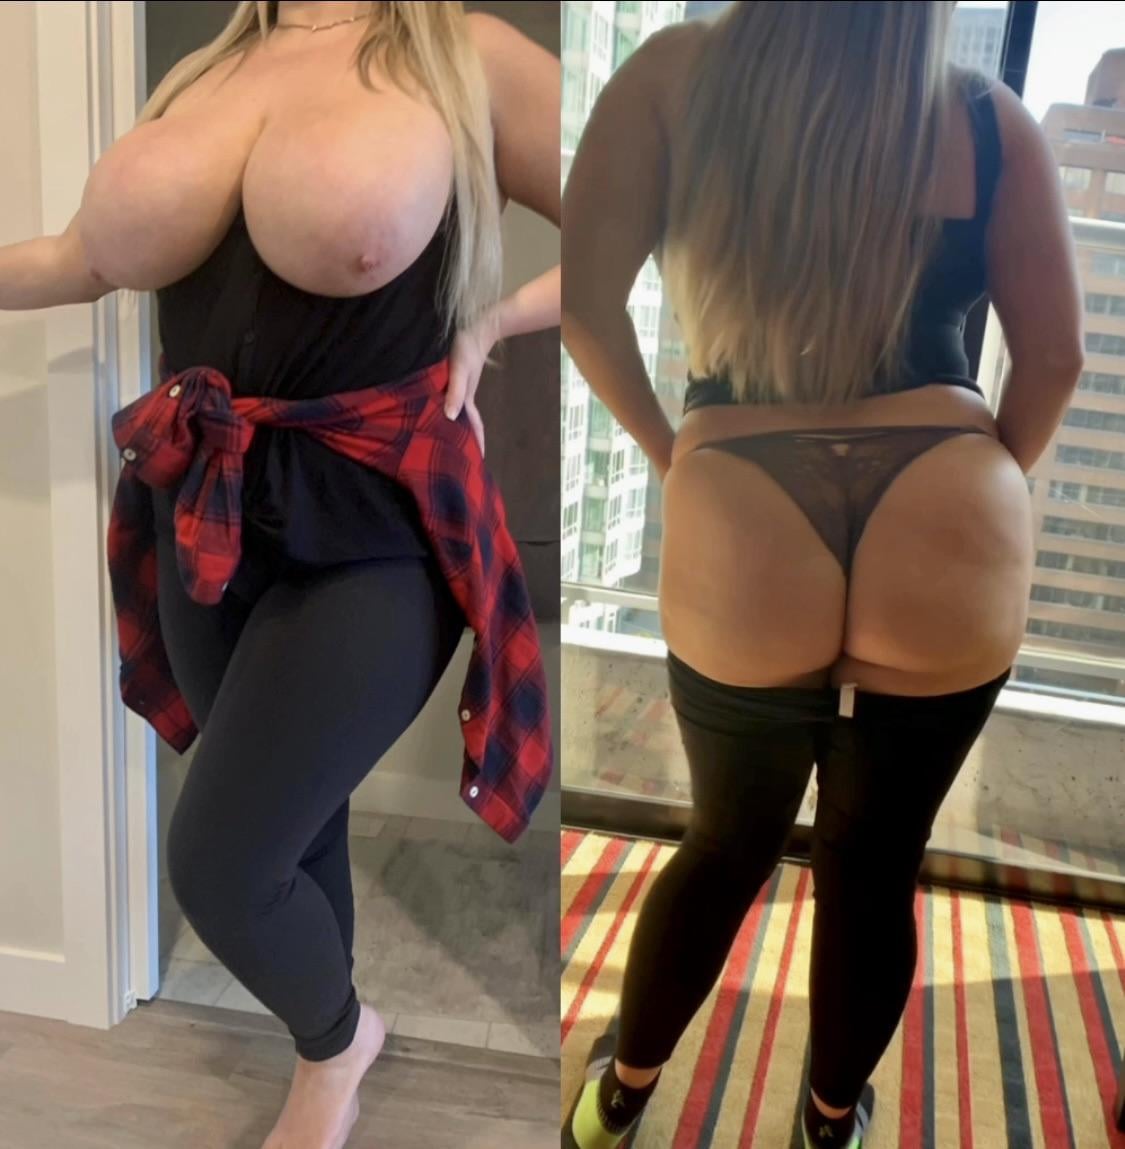 Happy Easter to all tits and ass lovers Thick